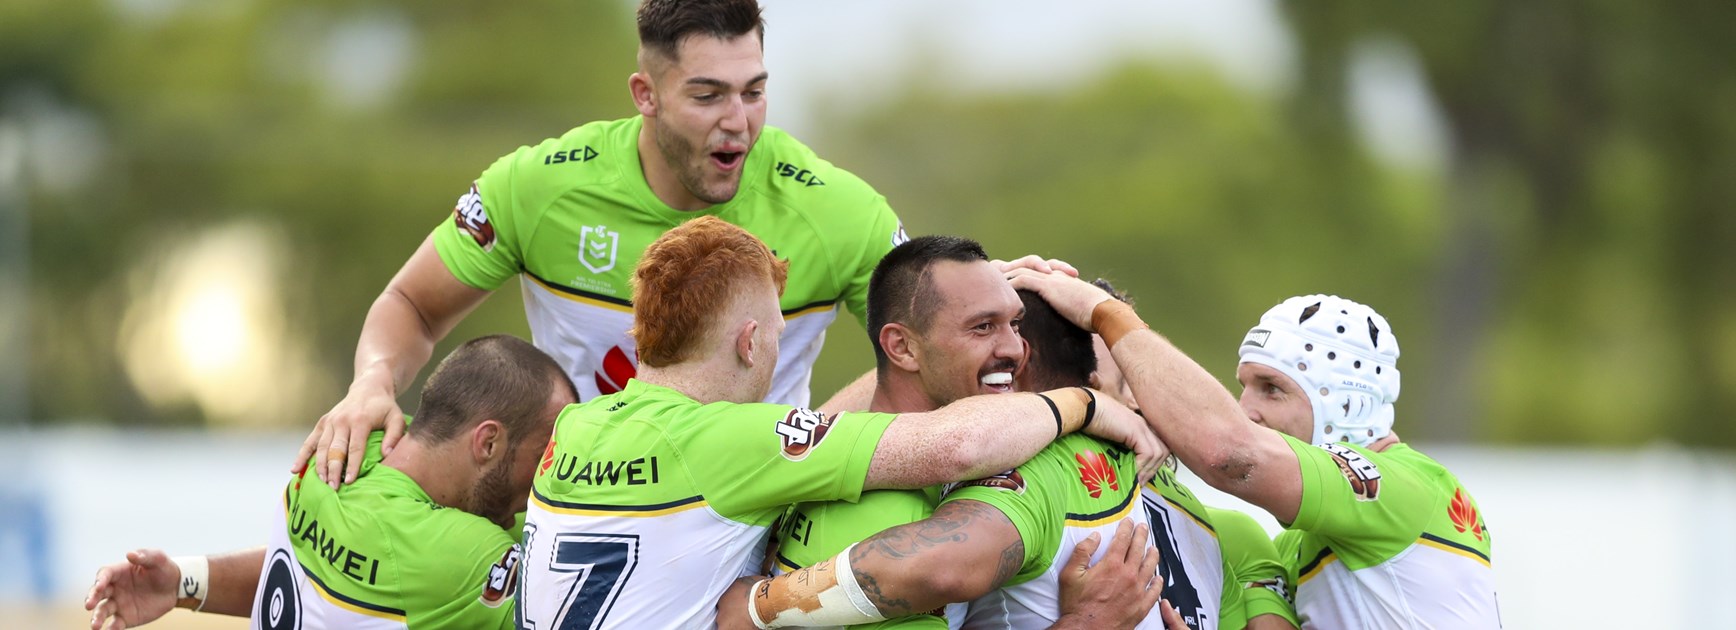 Raiders players celebrate a win over the Cowboys in Townsville 